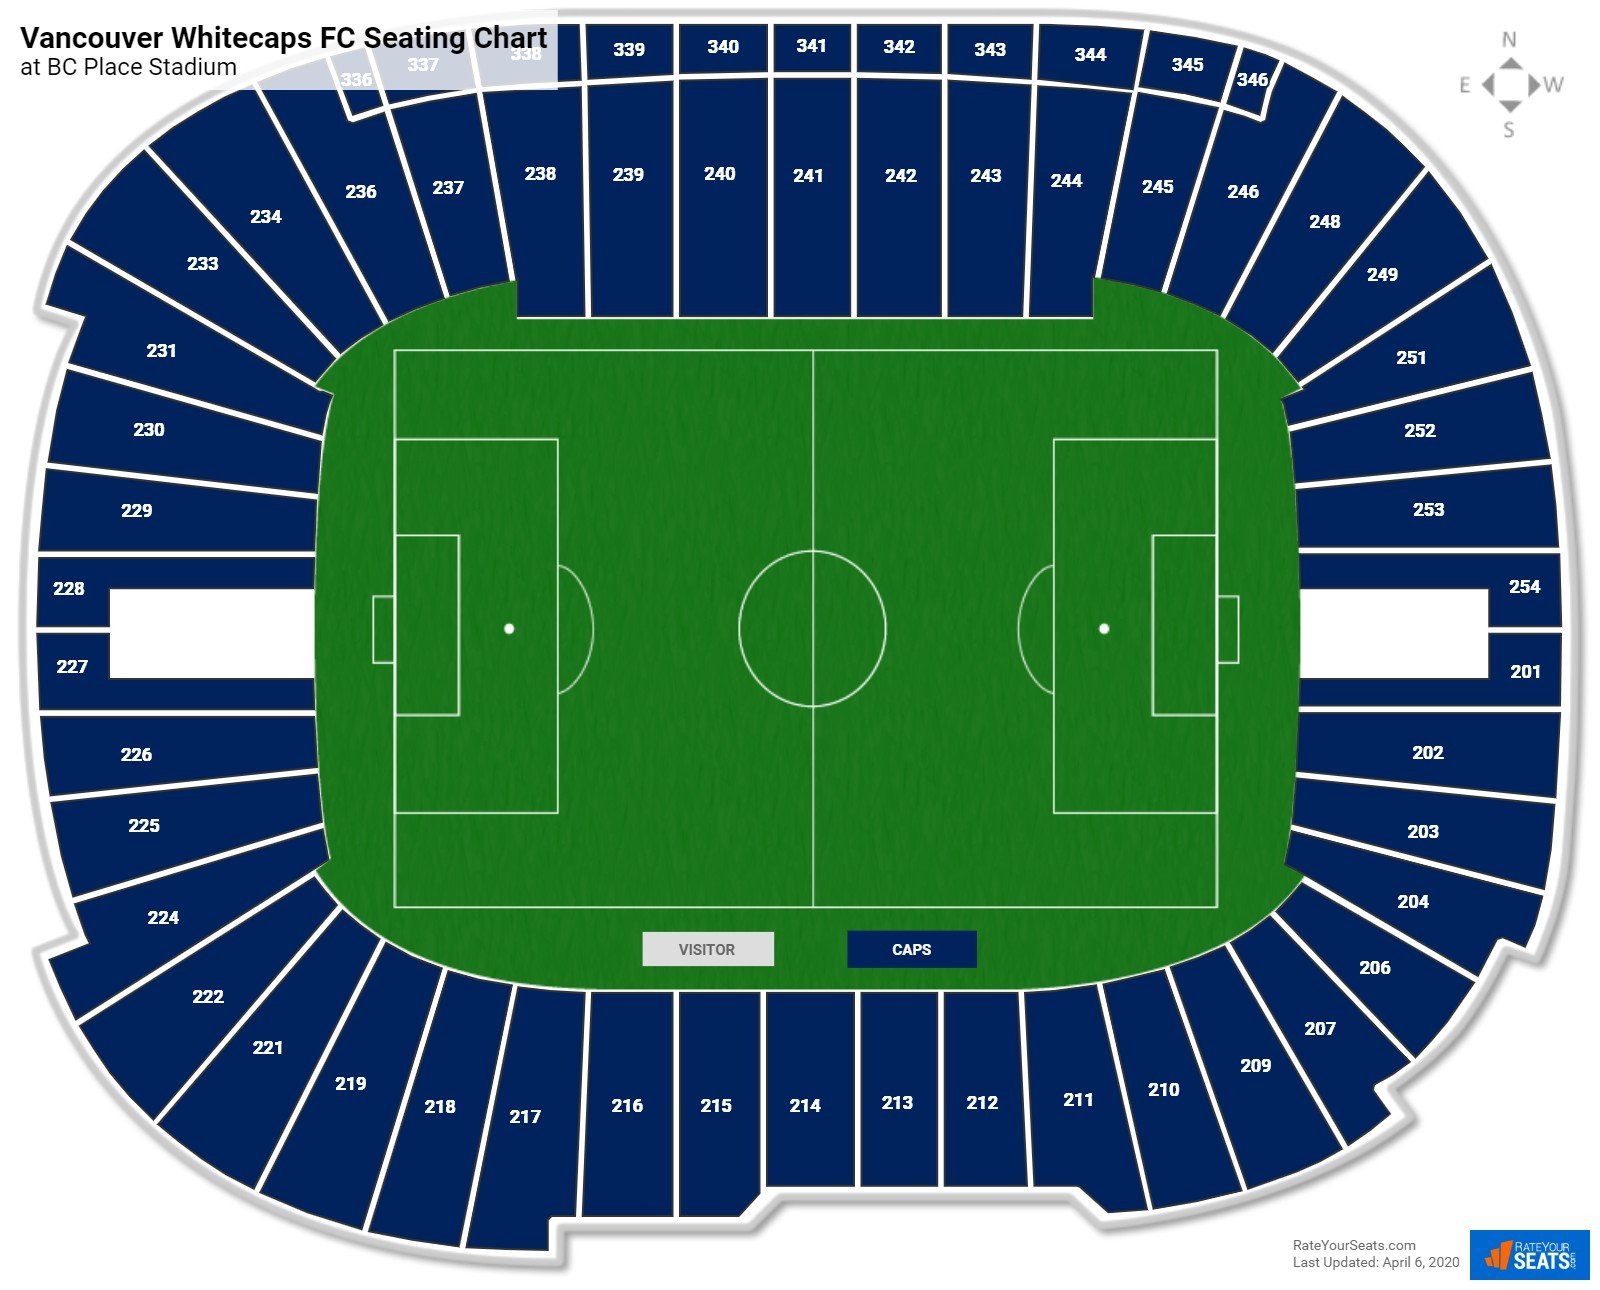 Vancouver Whitecaps FC Seating Charts at BC Place Stadium